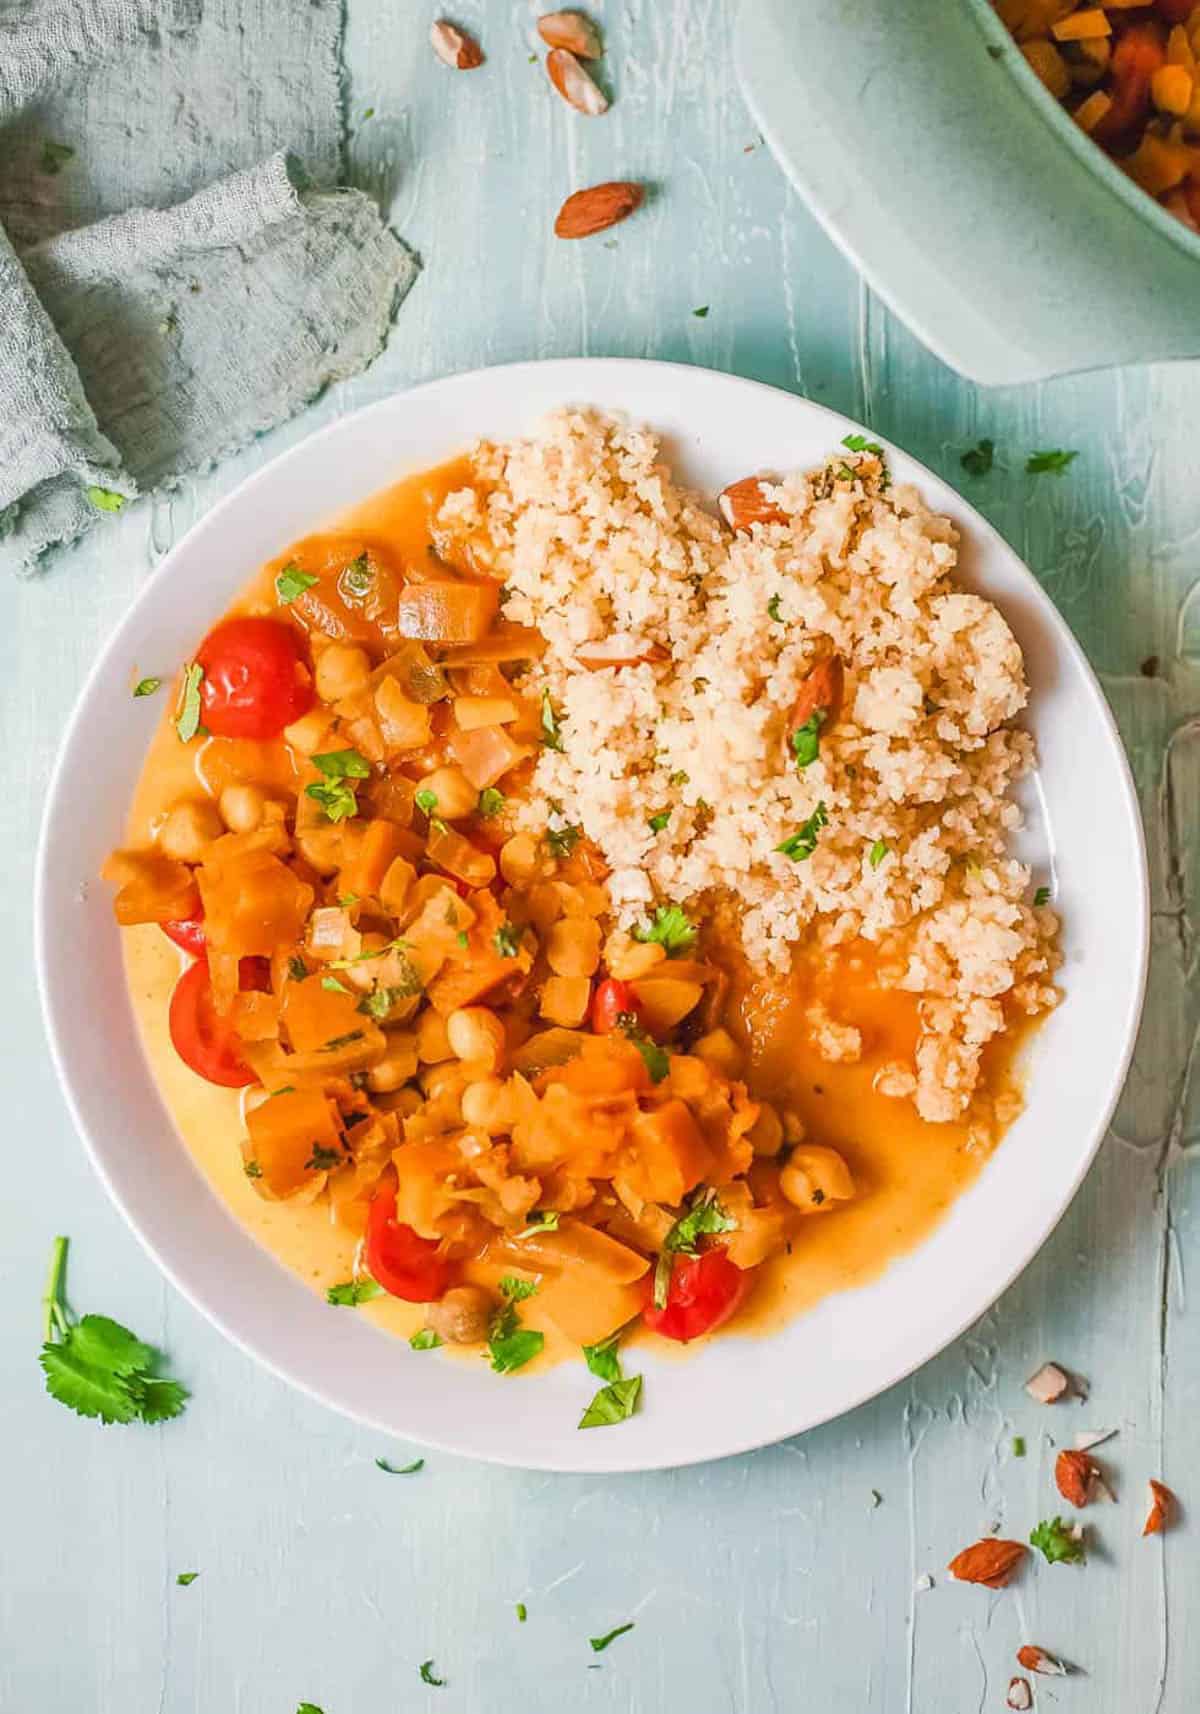 Butternut squash and chickpea curry, served with couscous on a white plate.